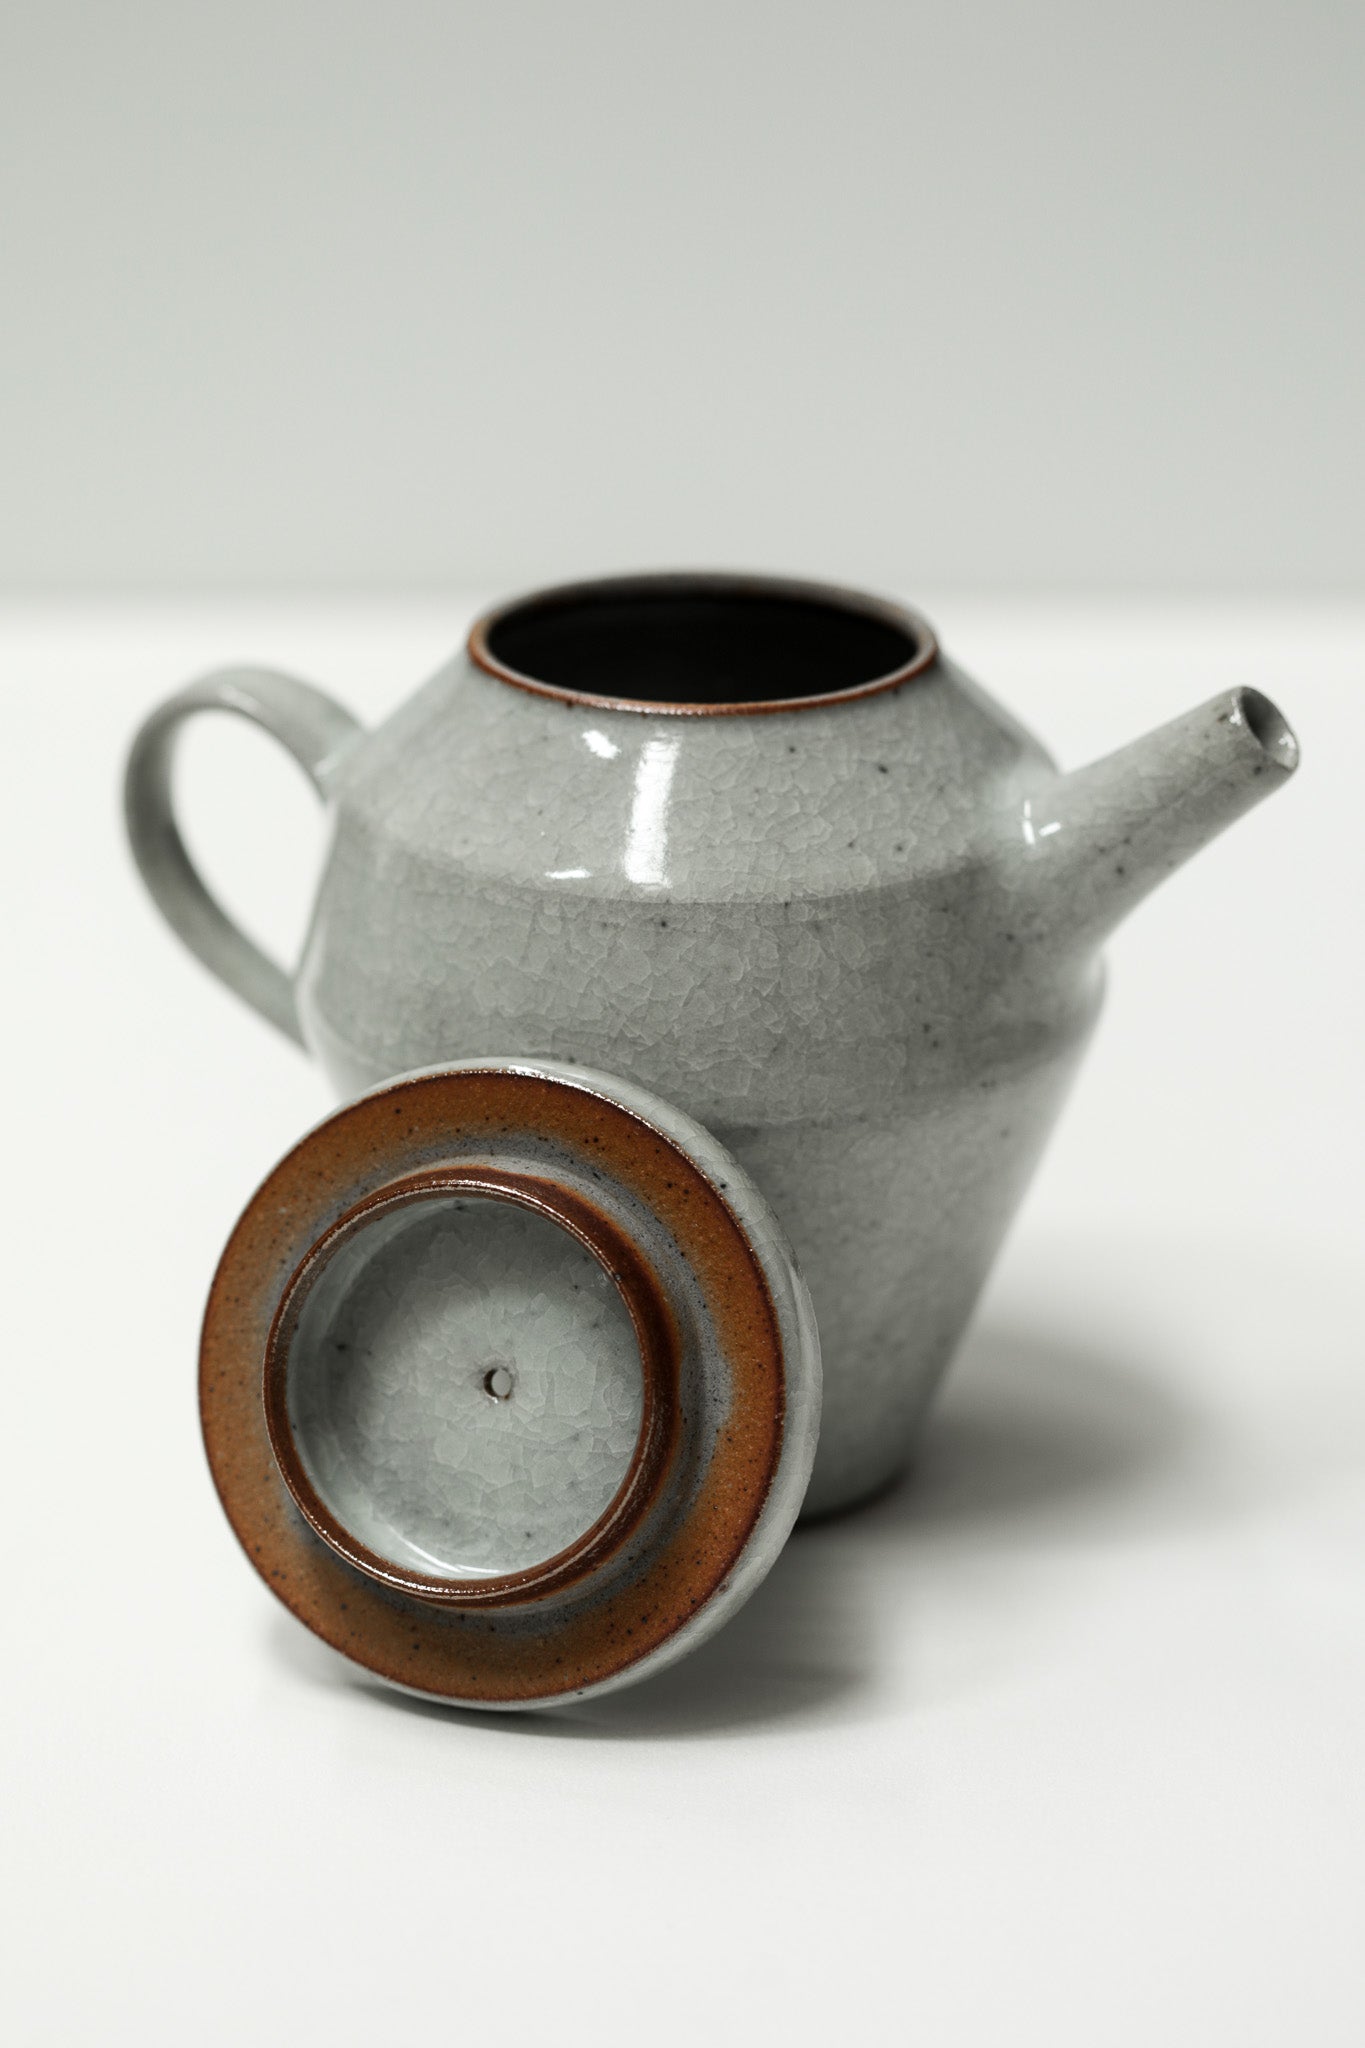 Florian Gadsby: Teaware for One